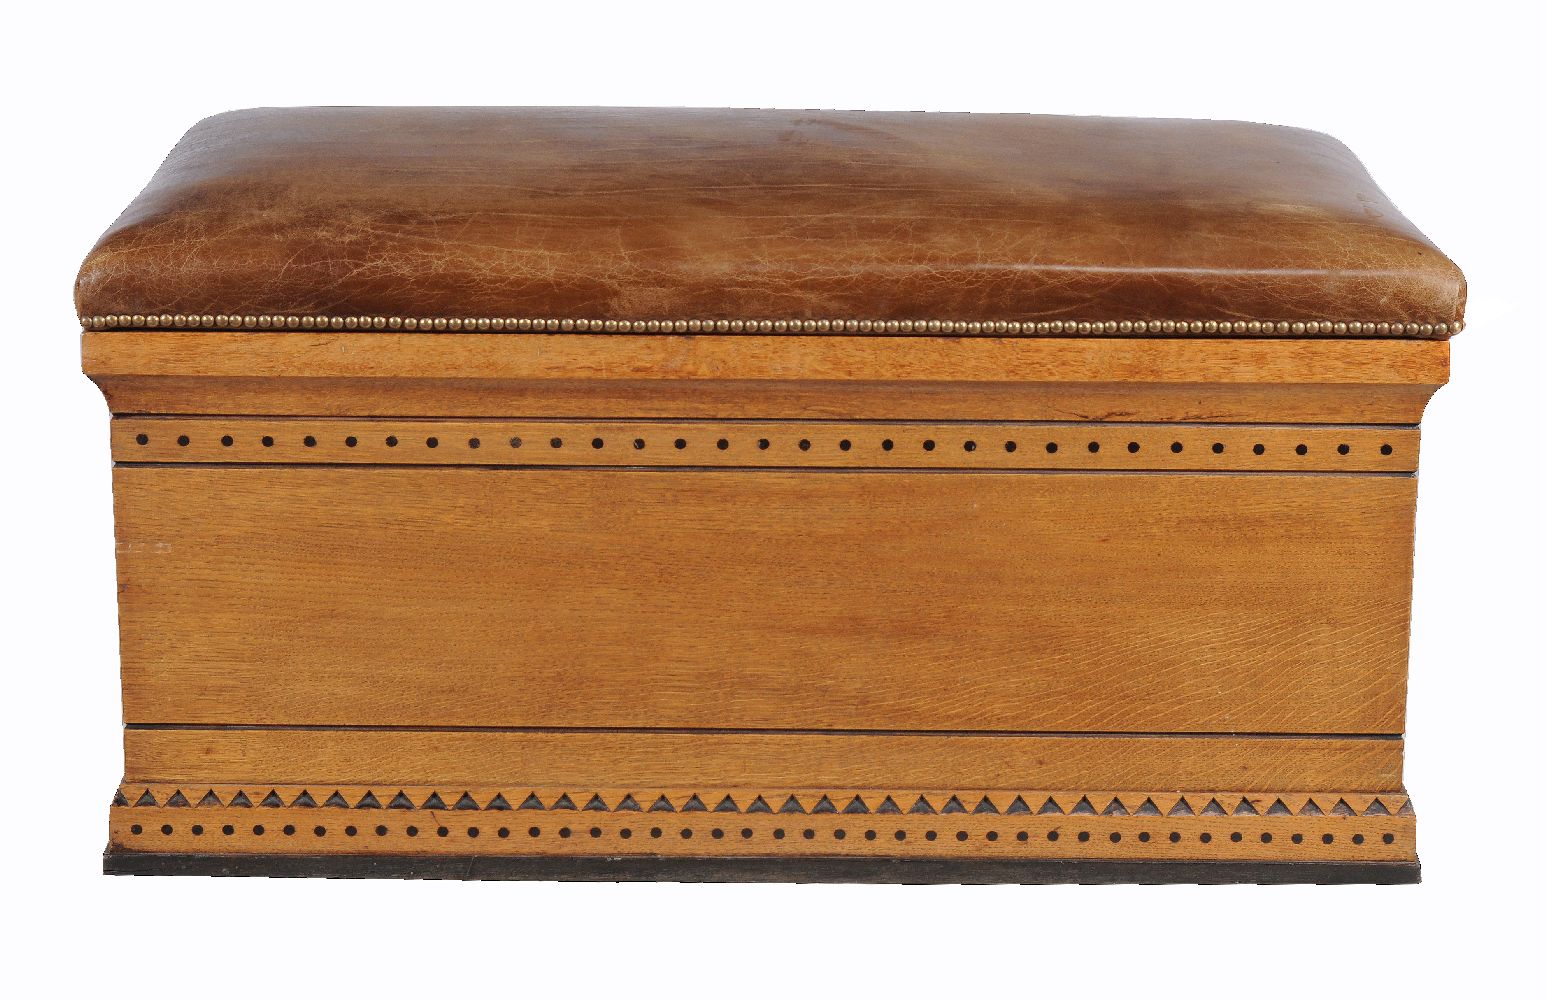 An Aesthetic Movement ash and leather upholstered Ottoman, circa 1890, 53cm high, 105cm wide, 61cm